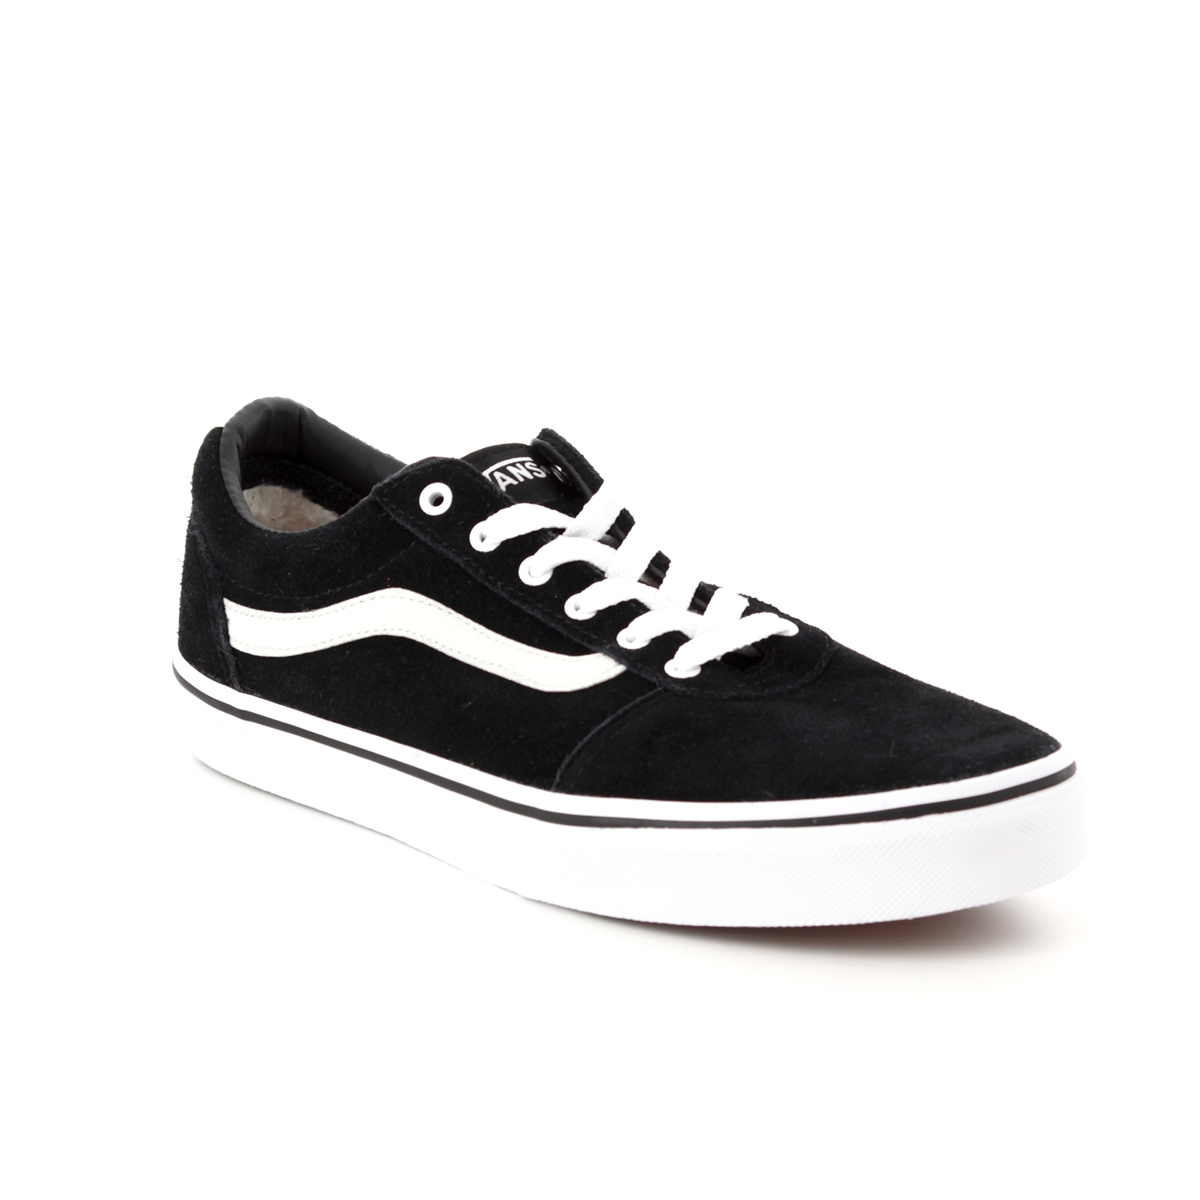 vans trainers, OFF 73%,Cheap price!